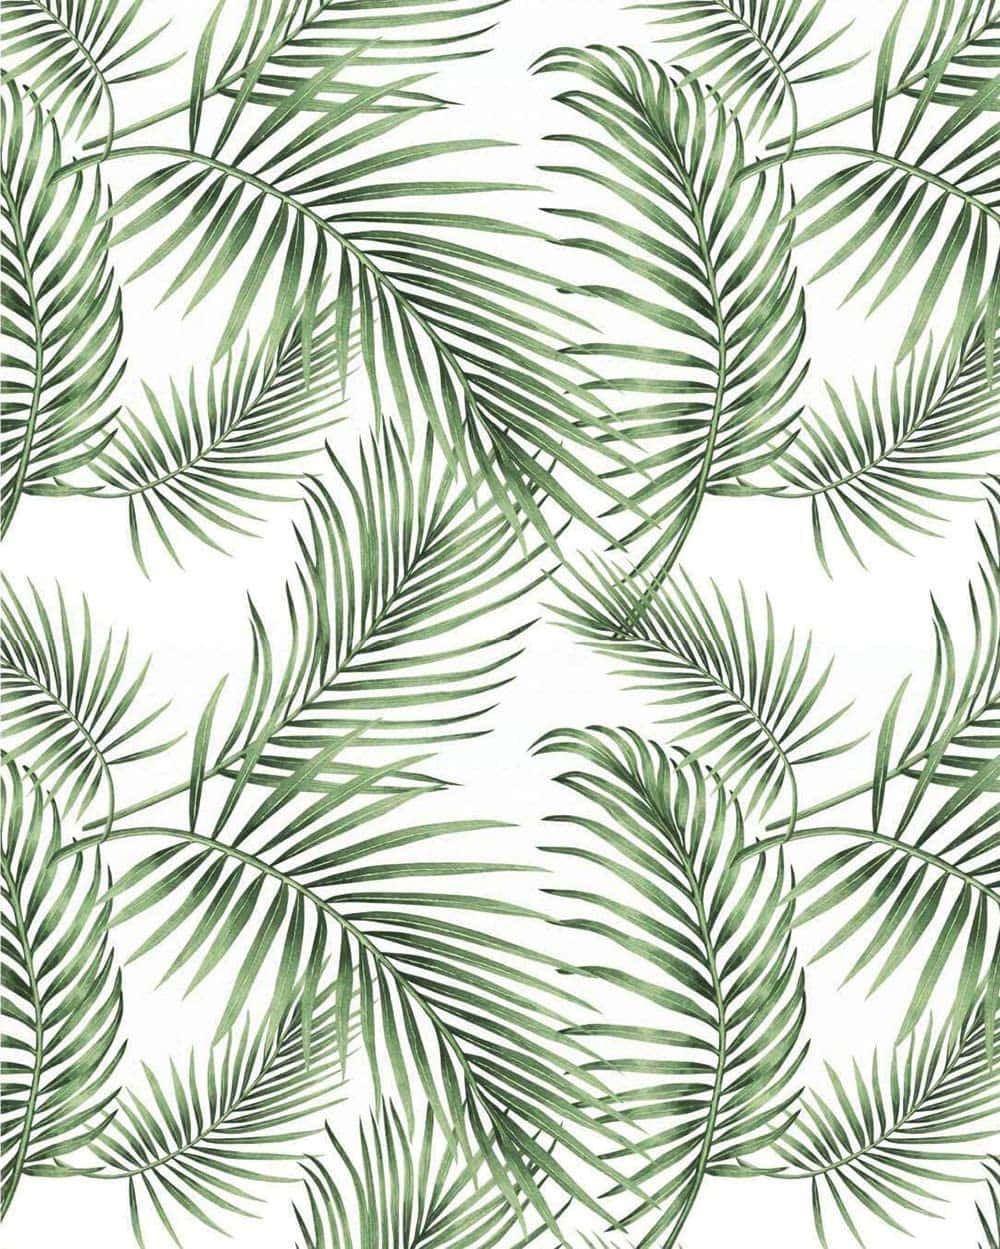 A Green Palm Leaf Pattern On A White Background